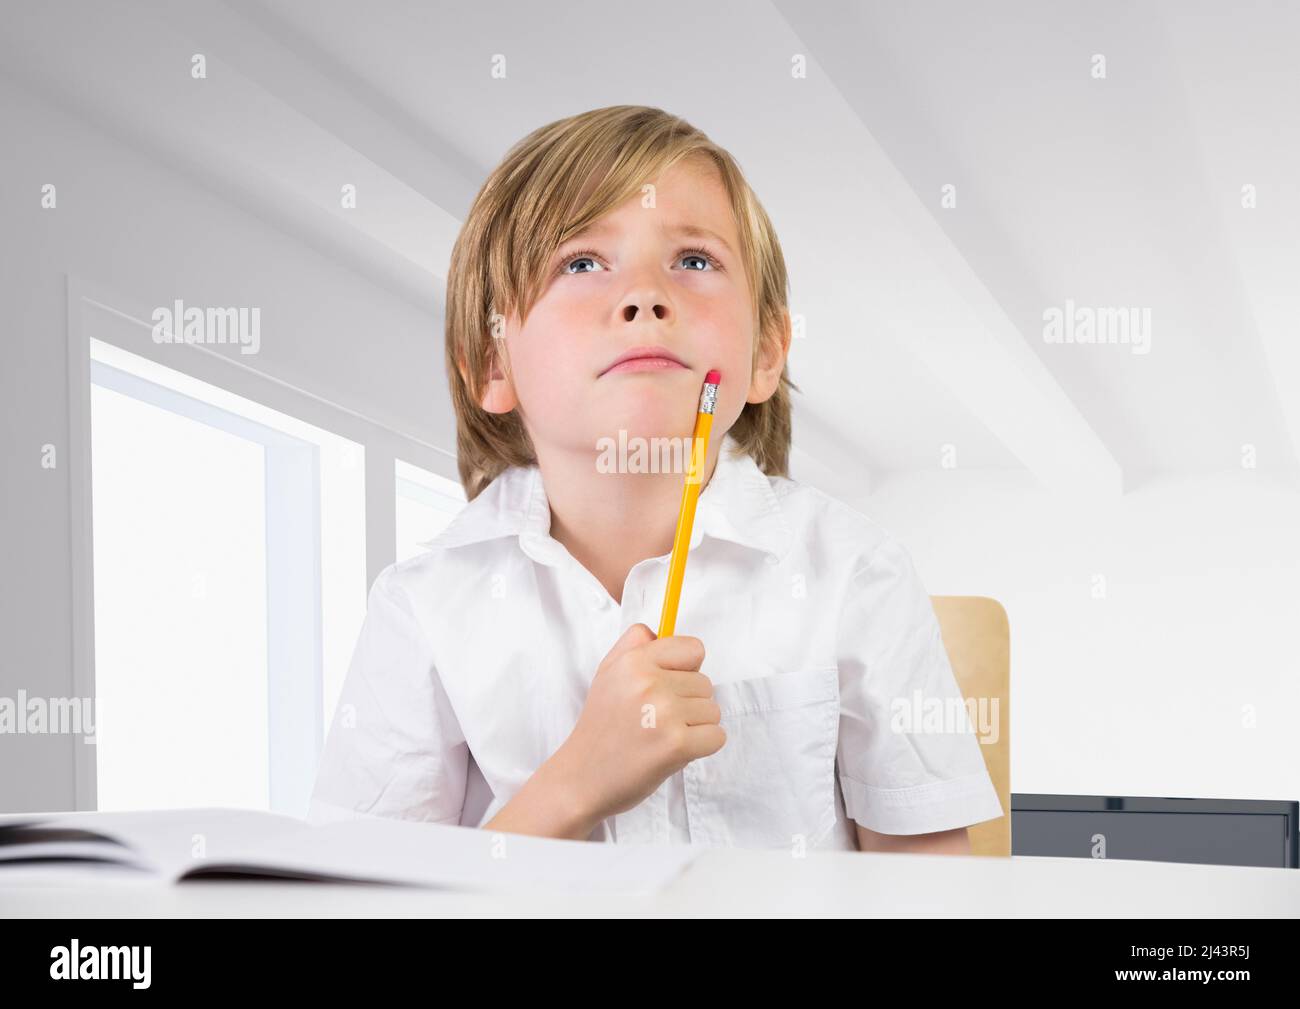 Thoughtful caucasian boy holding a pencil at school against office in background Stock Photo